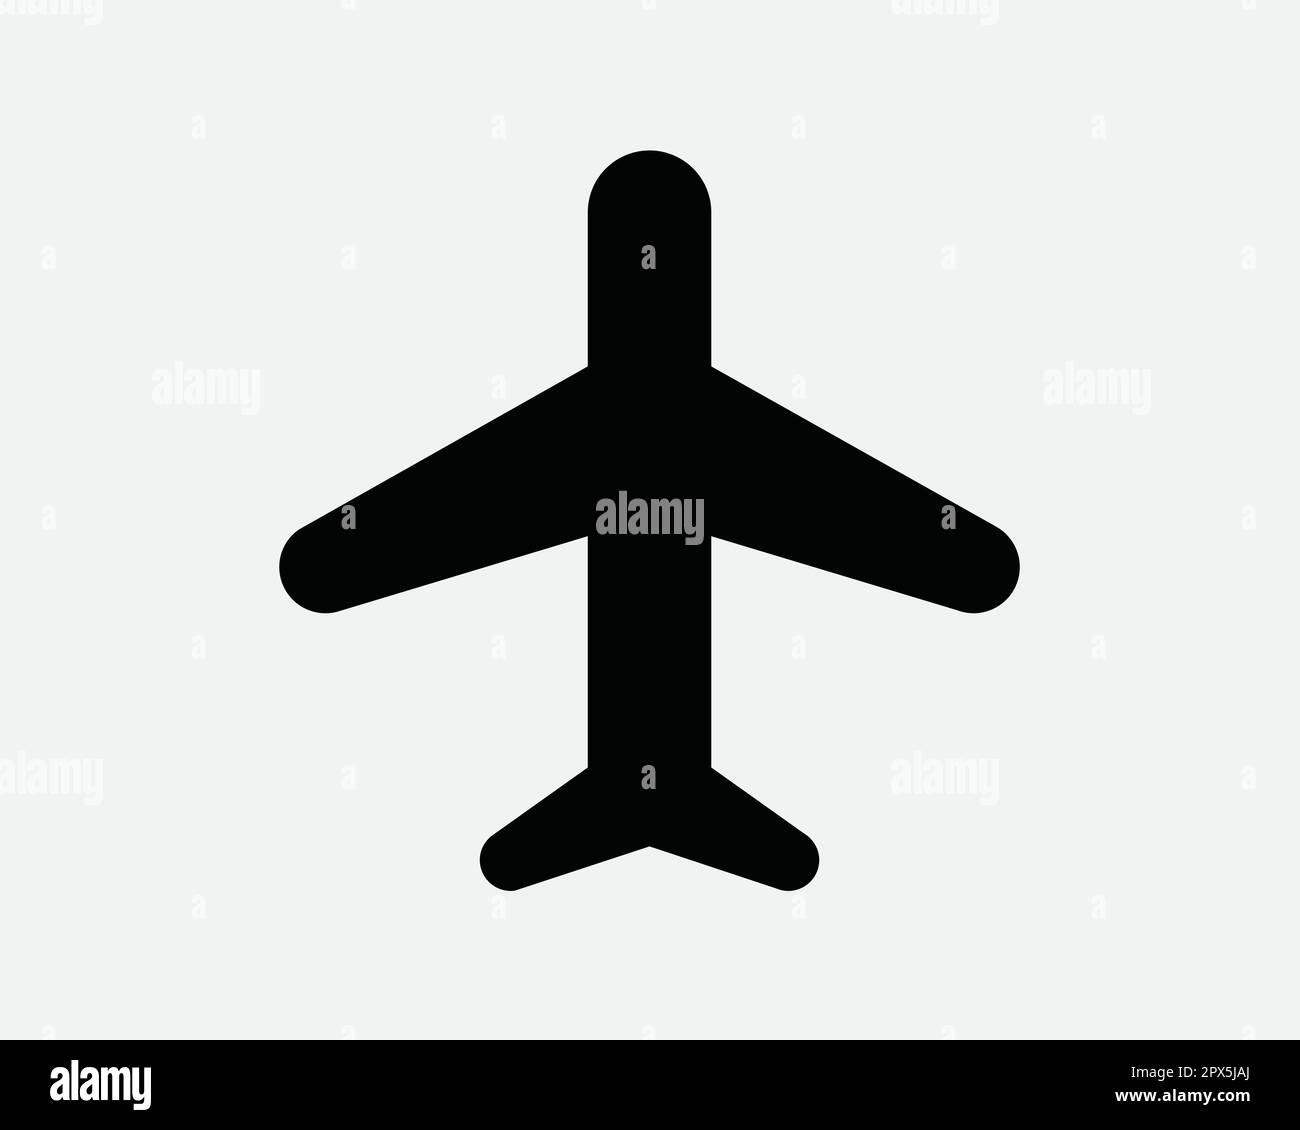 Air Plane Airplane Aircraft Aeroplane Flight Airport Aircraft Aviation Airline Black and White Icon Sign Symbol Vector Artwork Clipart Illustration Stock Vector